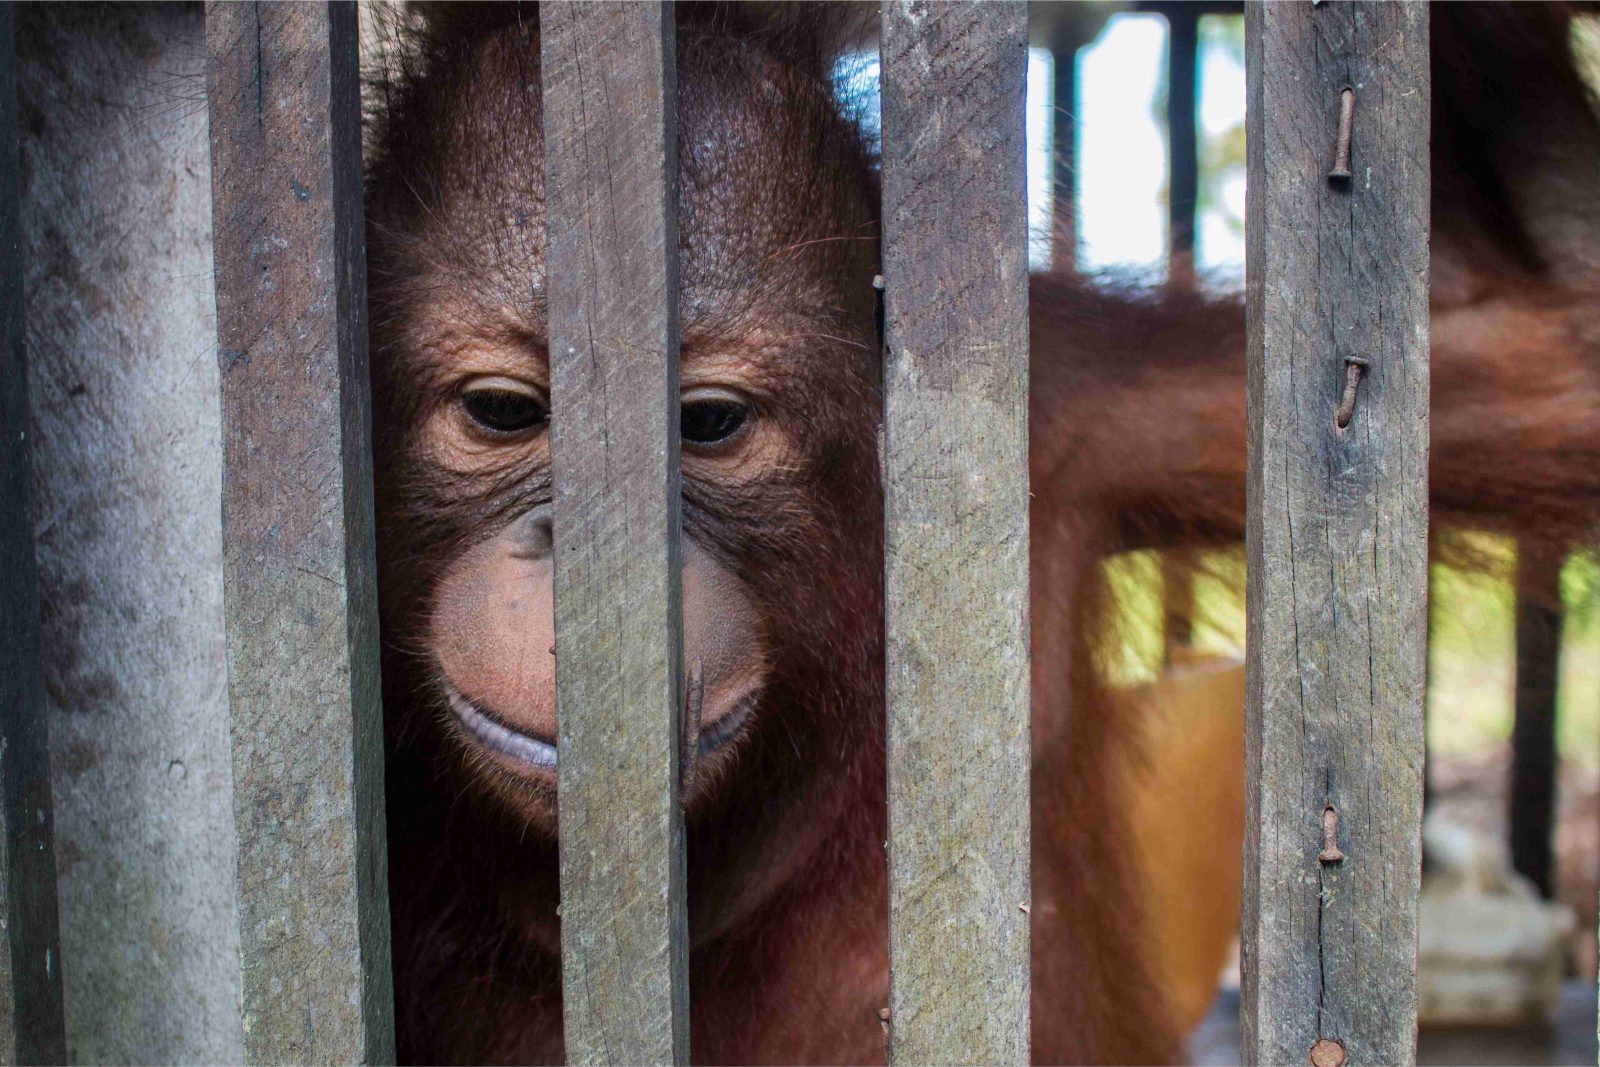 Baby orangutan is freed after more than a YEAR kept inside a cage the size of a cupboard by plantation workers